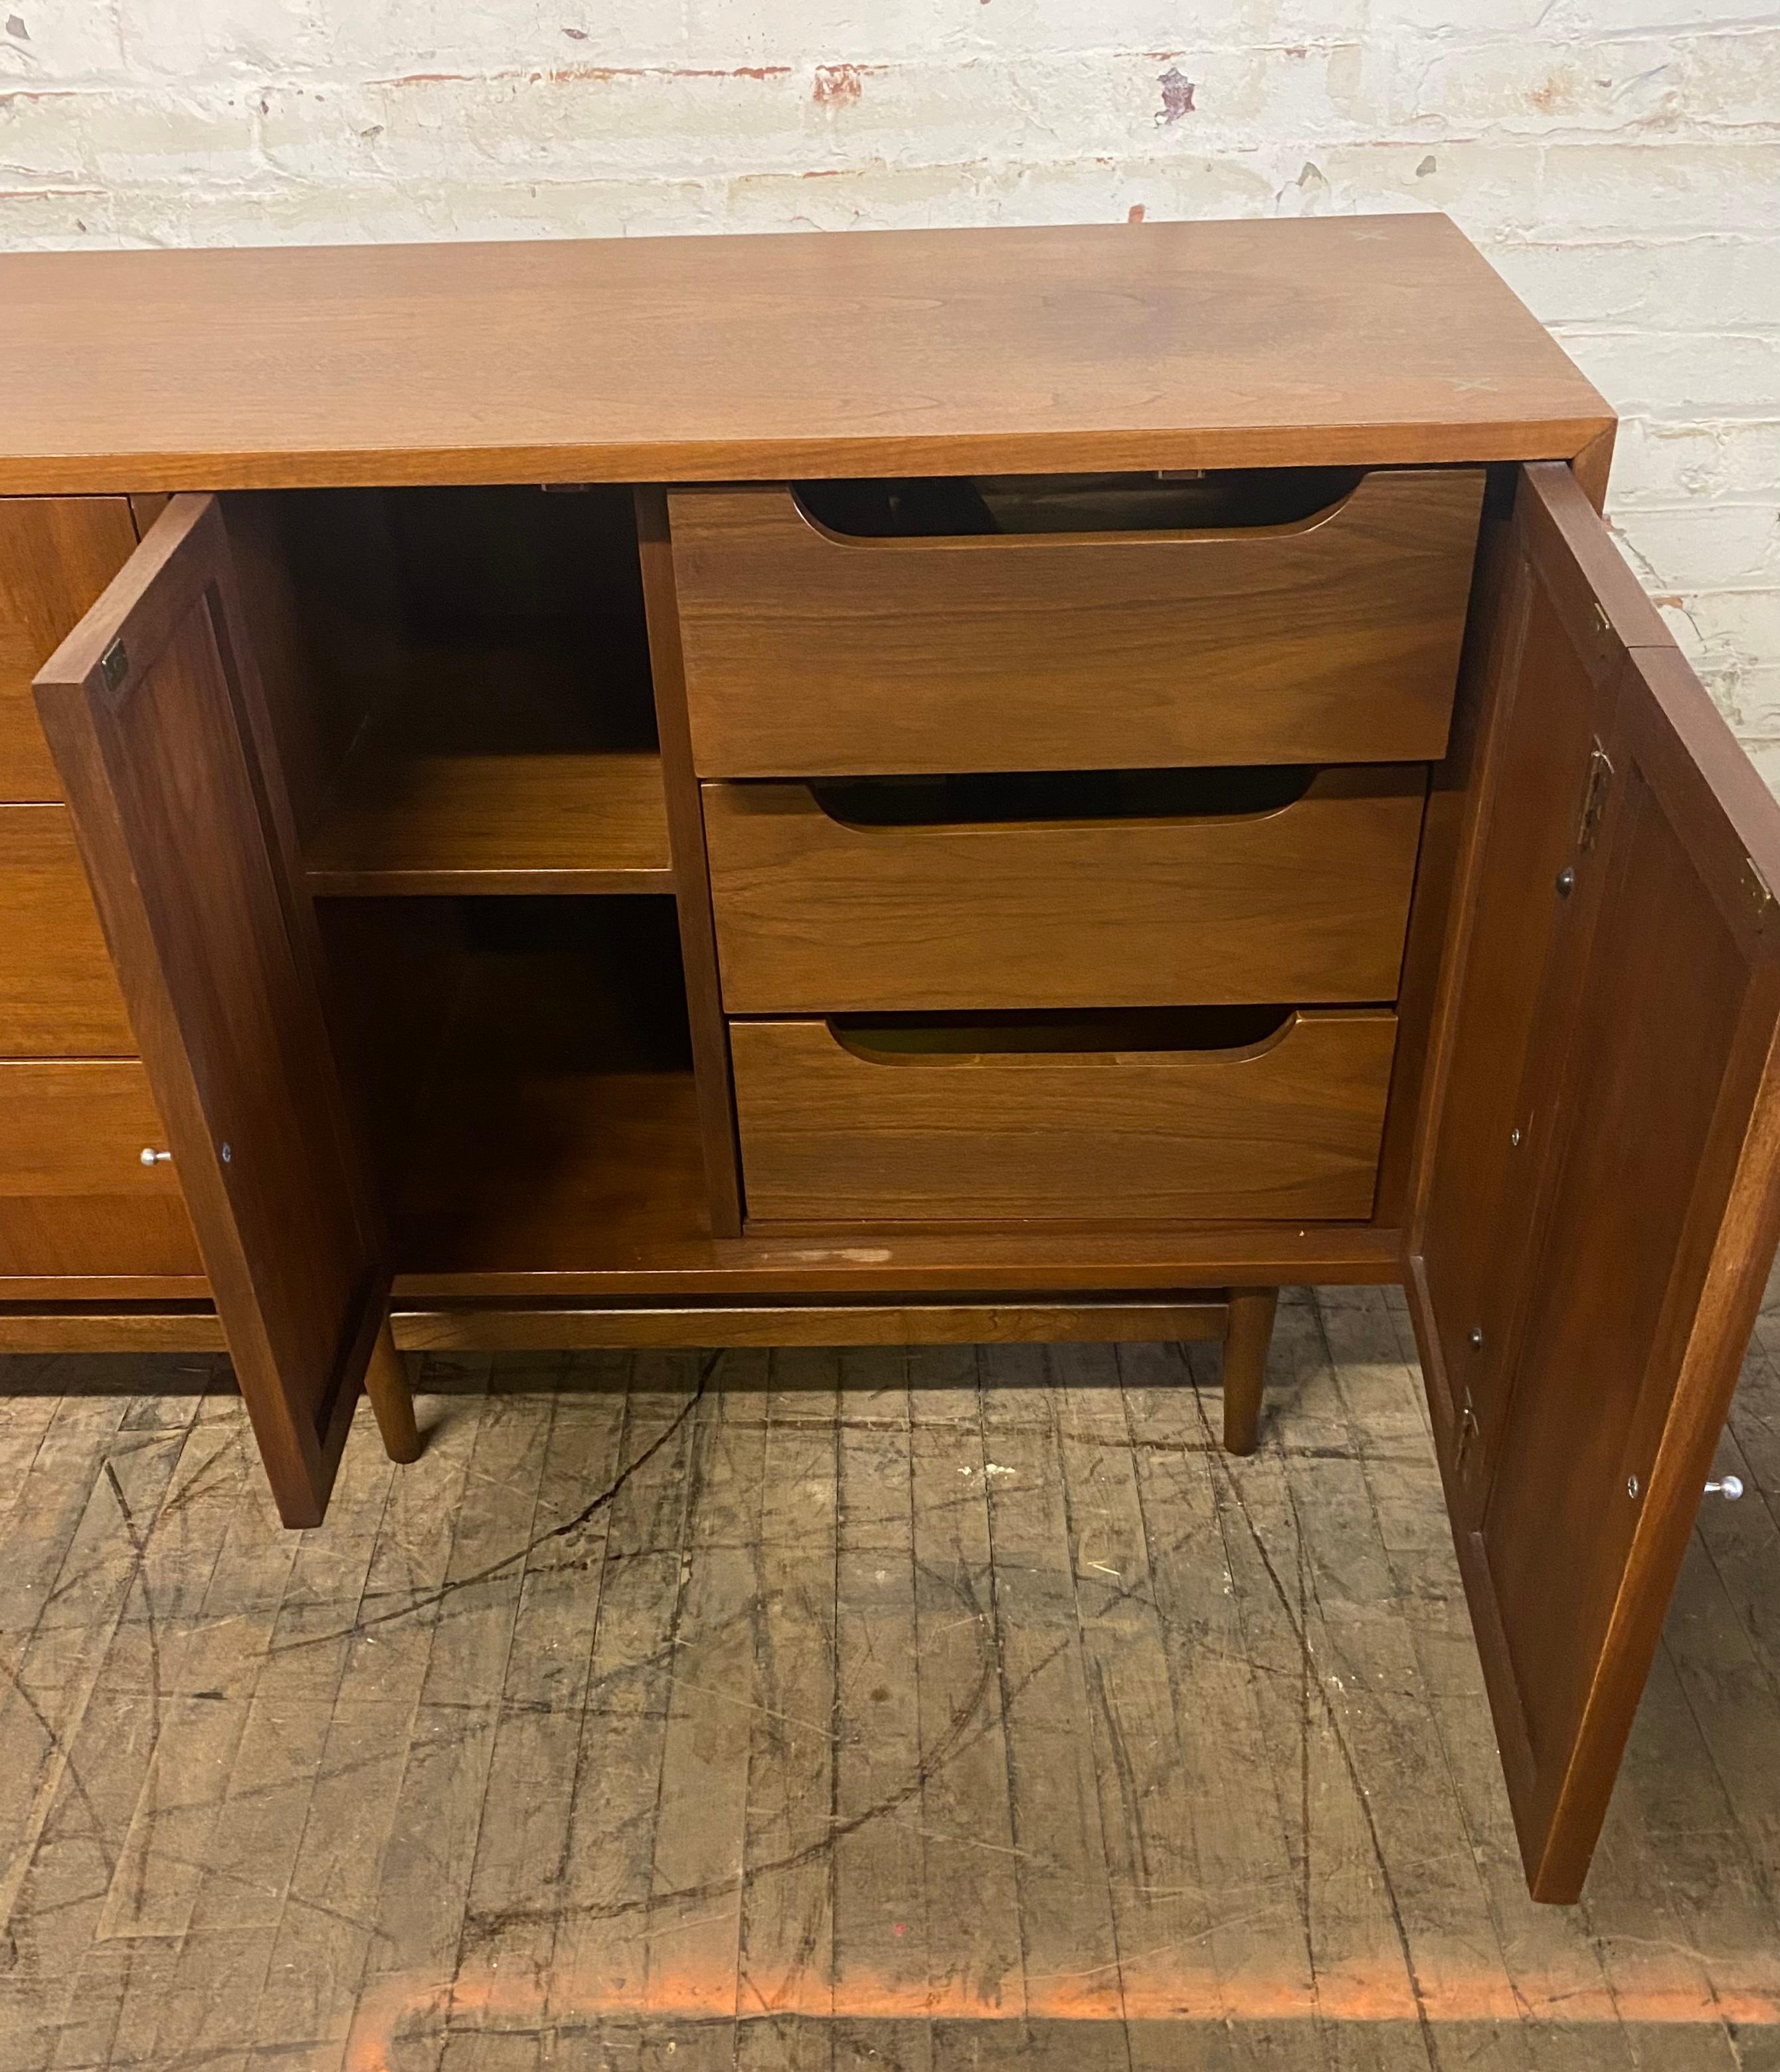 Stunning walnut modernist dresser designed by Merton Gershun, manufactured by American Of Martinsville. Classic aluminum x's and asymetrical pulls, minor stain to (see photo). Hand delivery avail to New York City or anywhere ken route from Buffalo